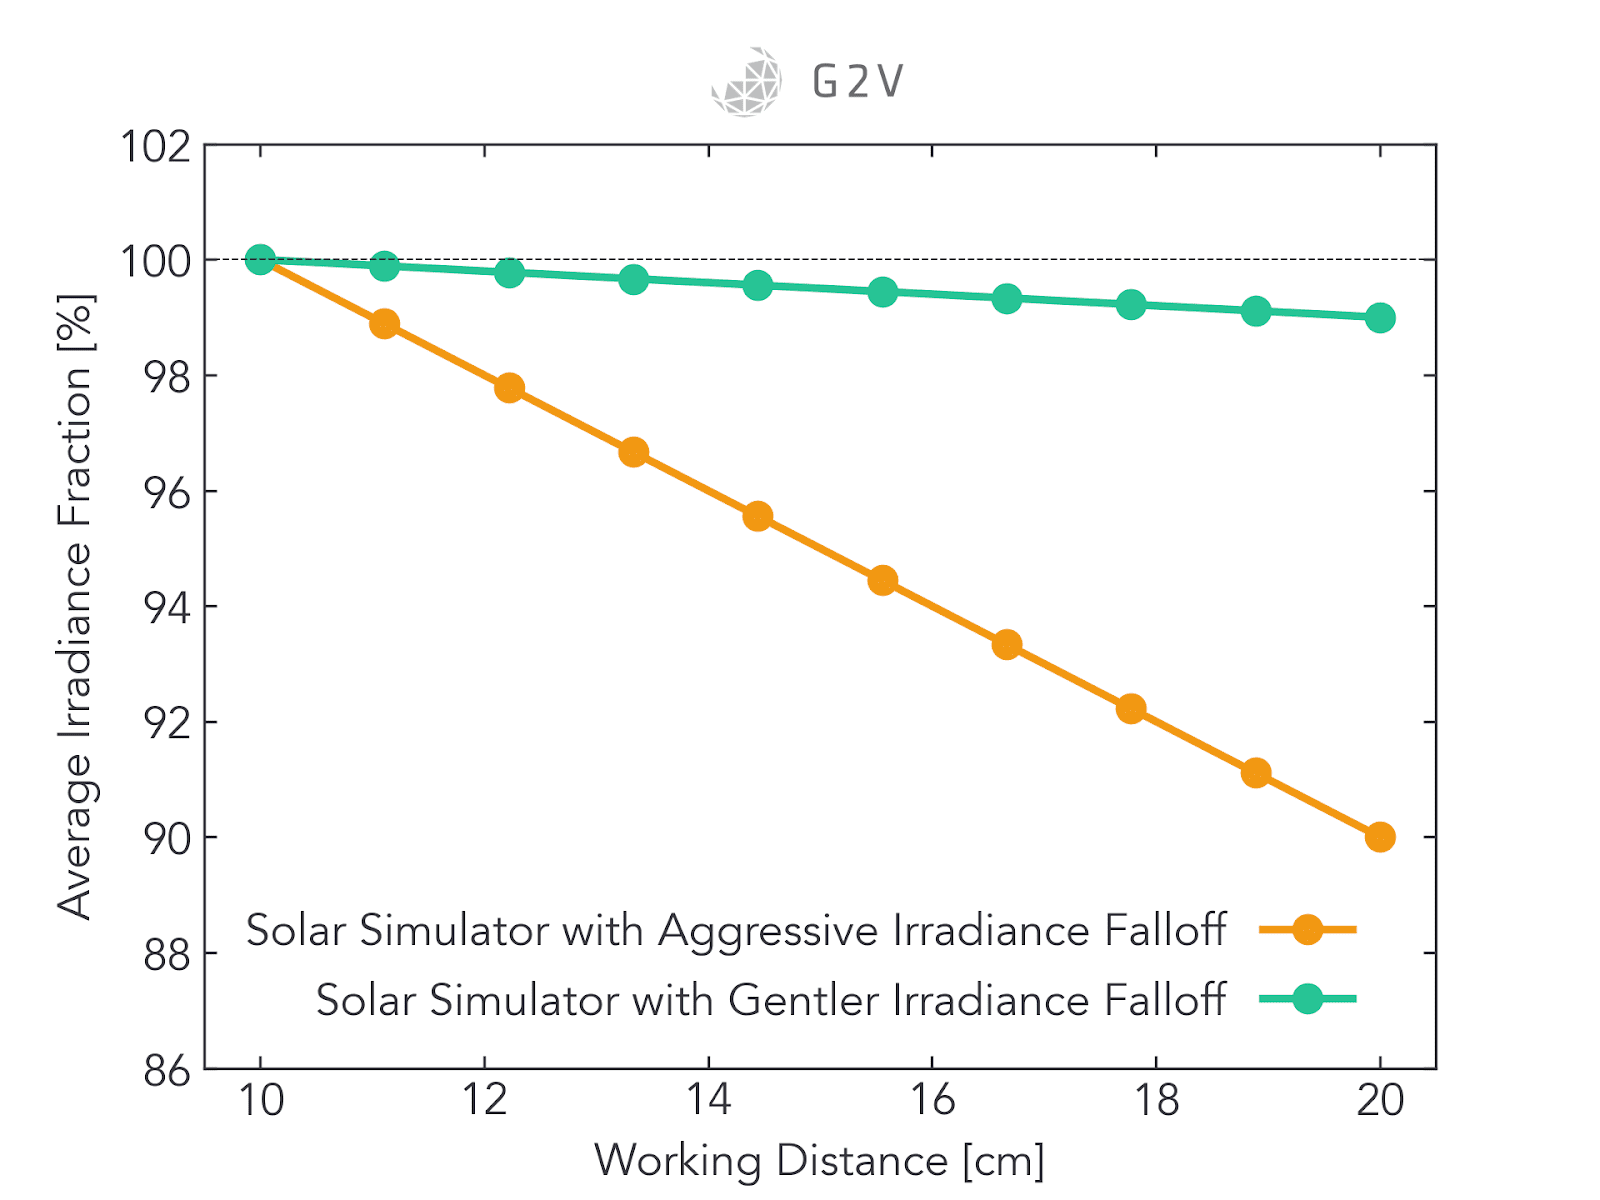 The approximate decrease of irradiance for two hypothetical solar simulators  as a function of distance (where the normal working distance has been arbitrarily set to 10 cm). 